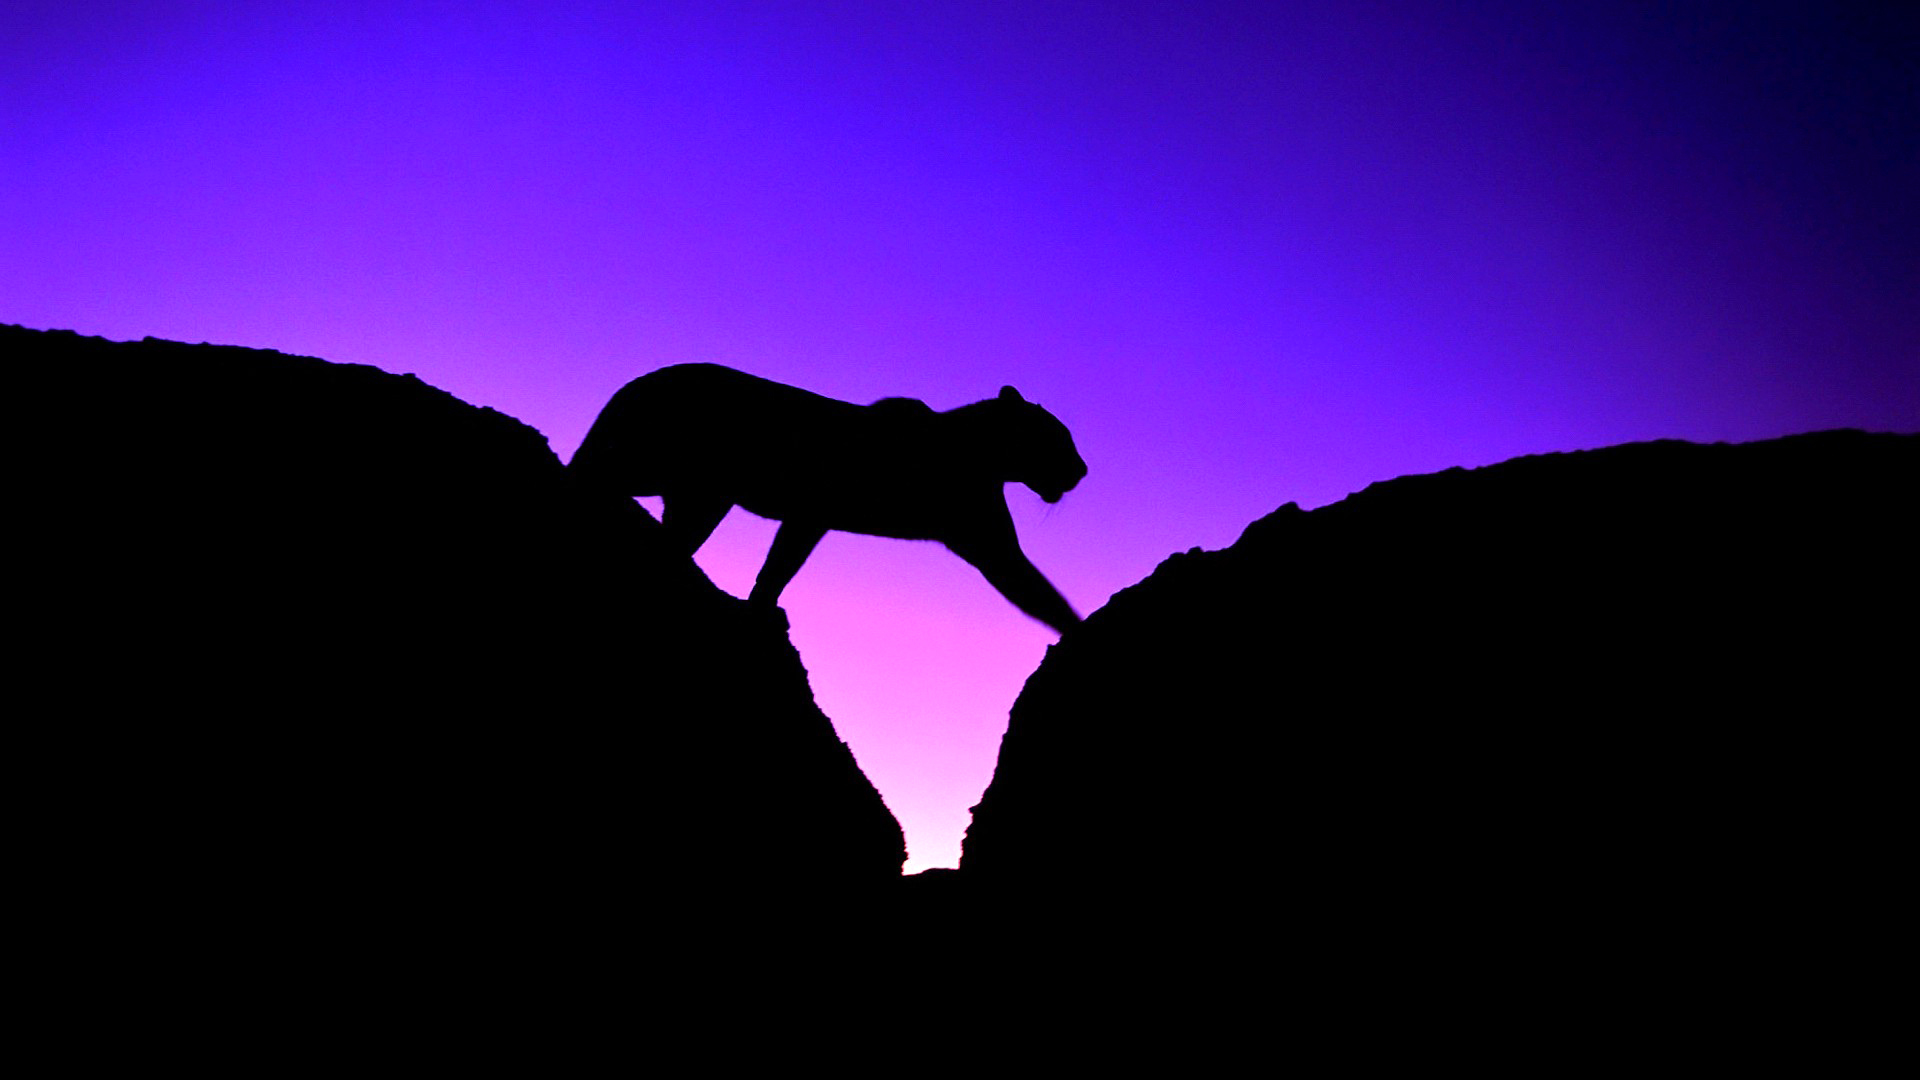 Wallpaper cougar panther silhouette cat sky sunset wallpapers